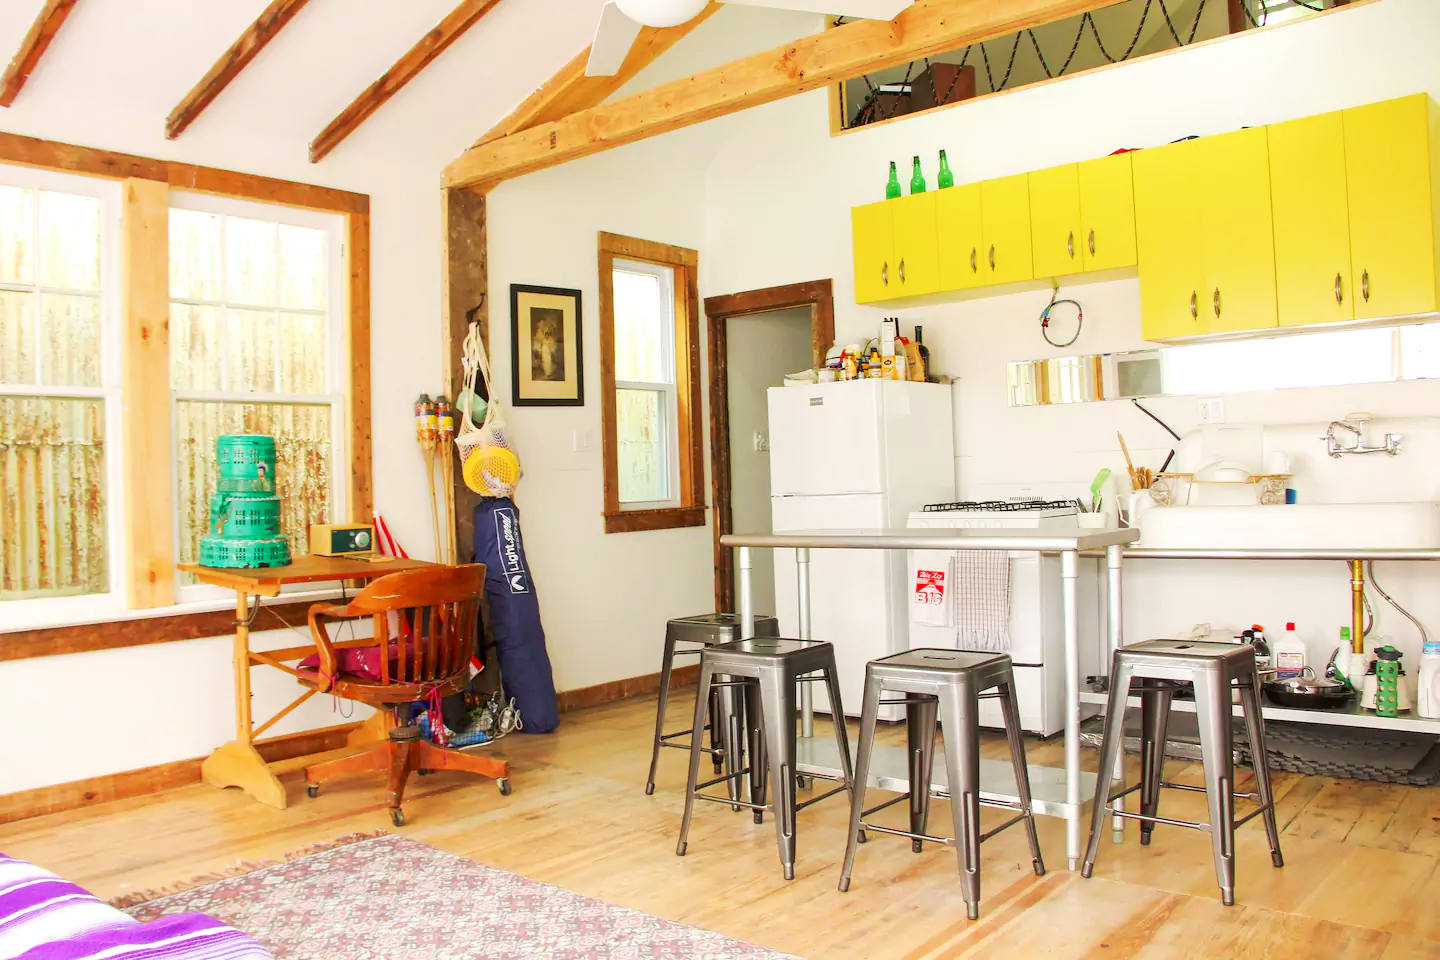 Take a Staycation at This Restored Bungalow in Rockaway Beach